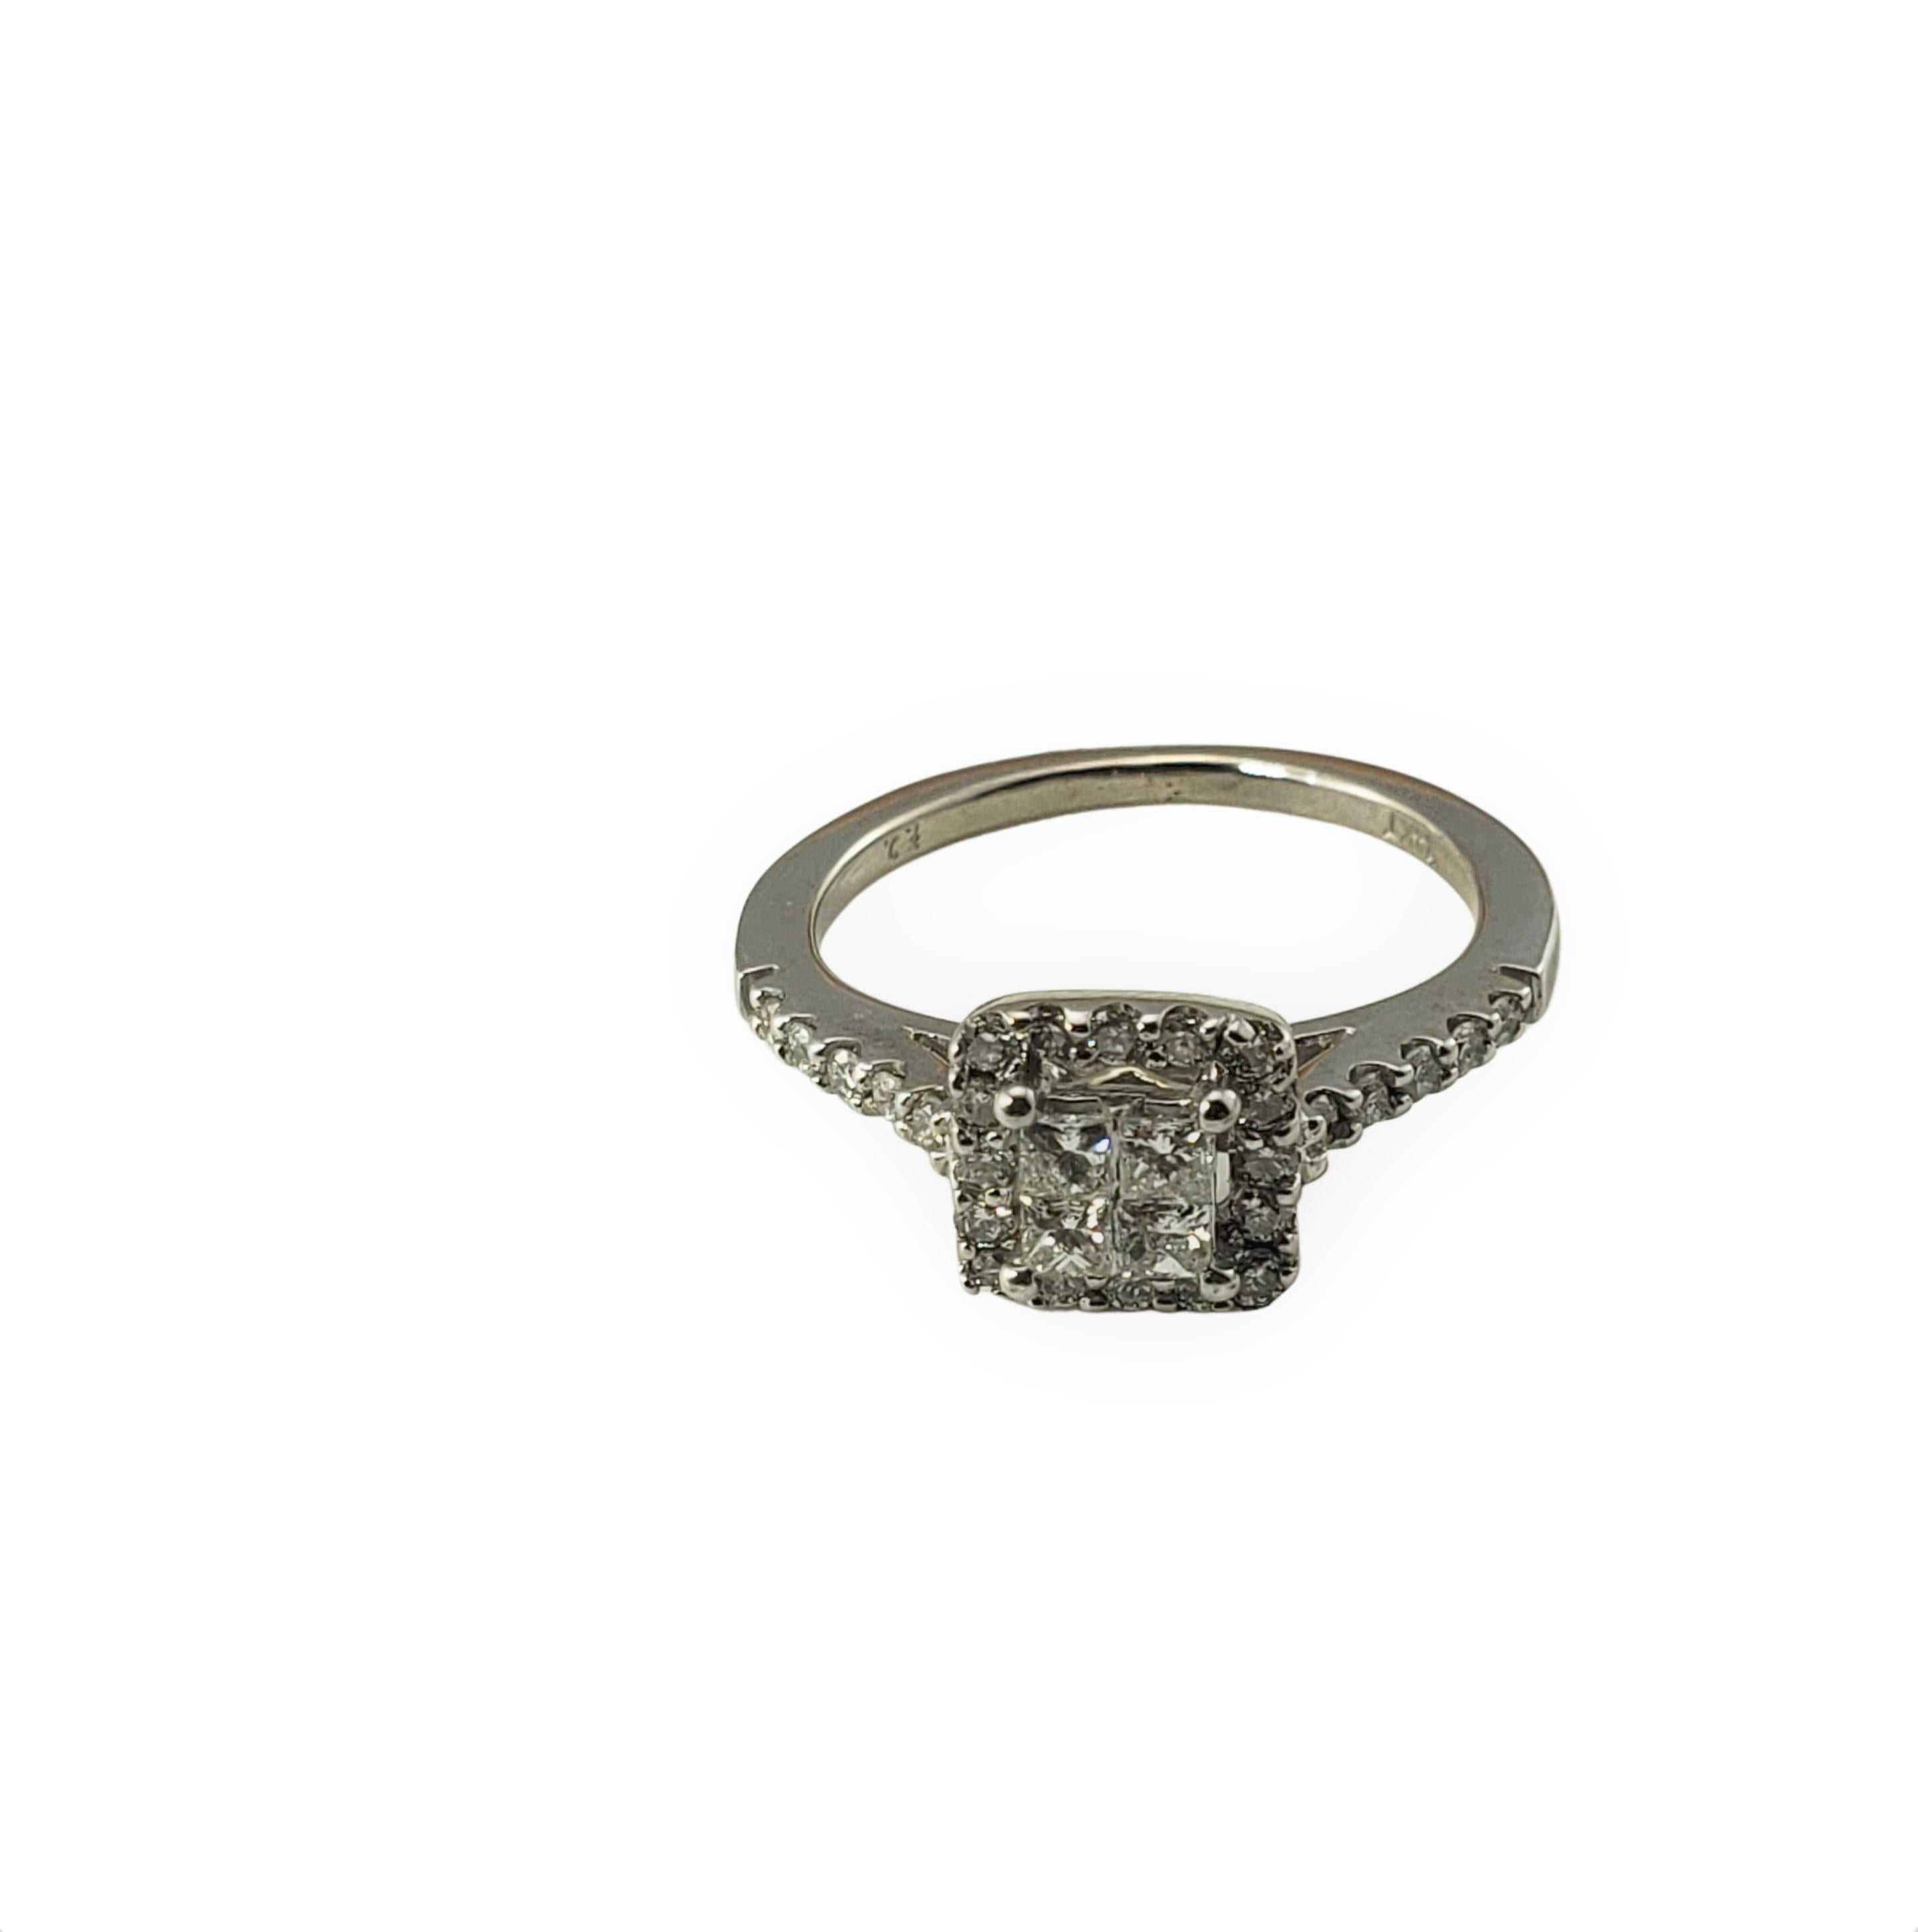 Vintage 14 Karat White Gold and Diamond Ring Size 4.25-

This sparkling ring features four princess cut diamonds and 26 round brilliant cut diamonds set in classic 14K white gold.
Shank: 1 mm. Top of ring measures 7 mm x 7 mm.

Approximate total